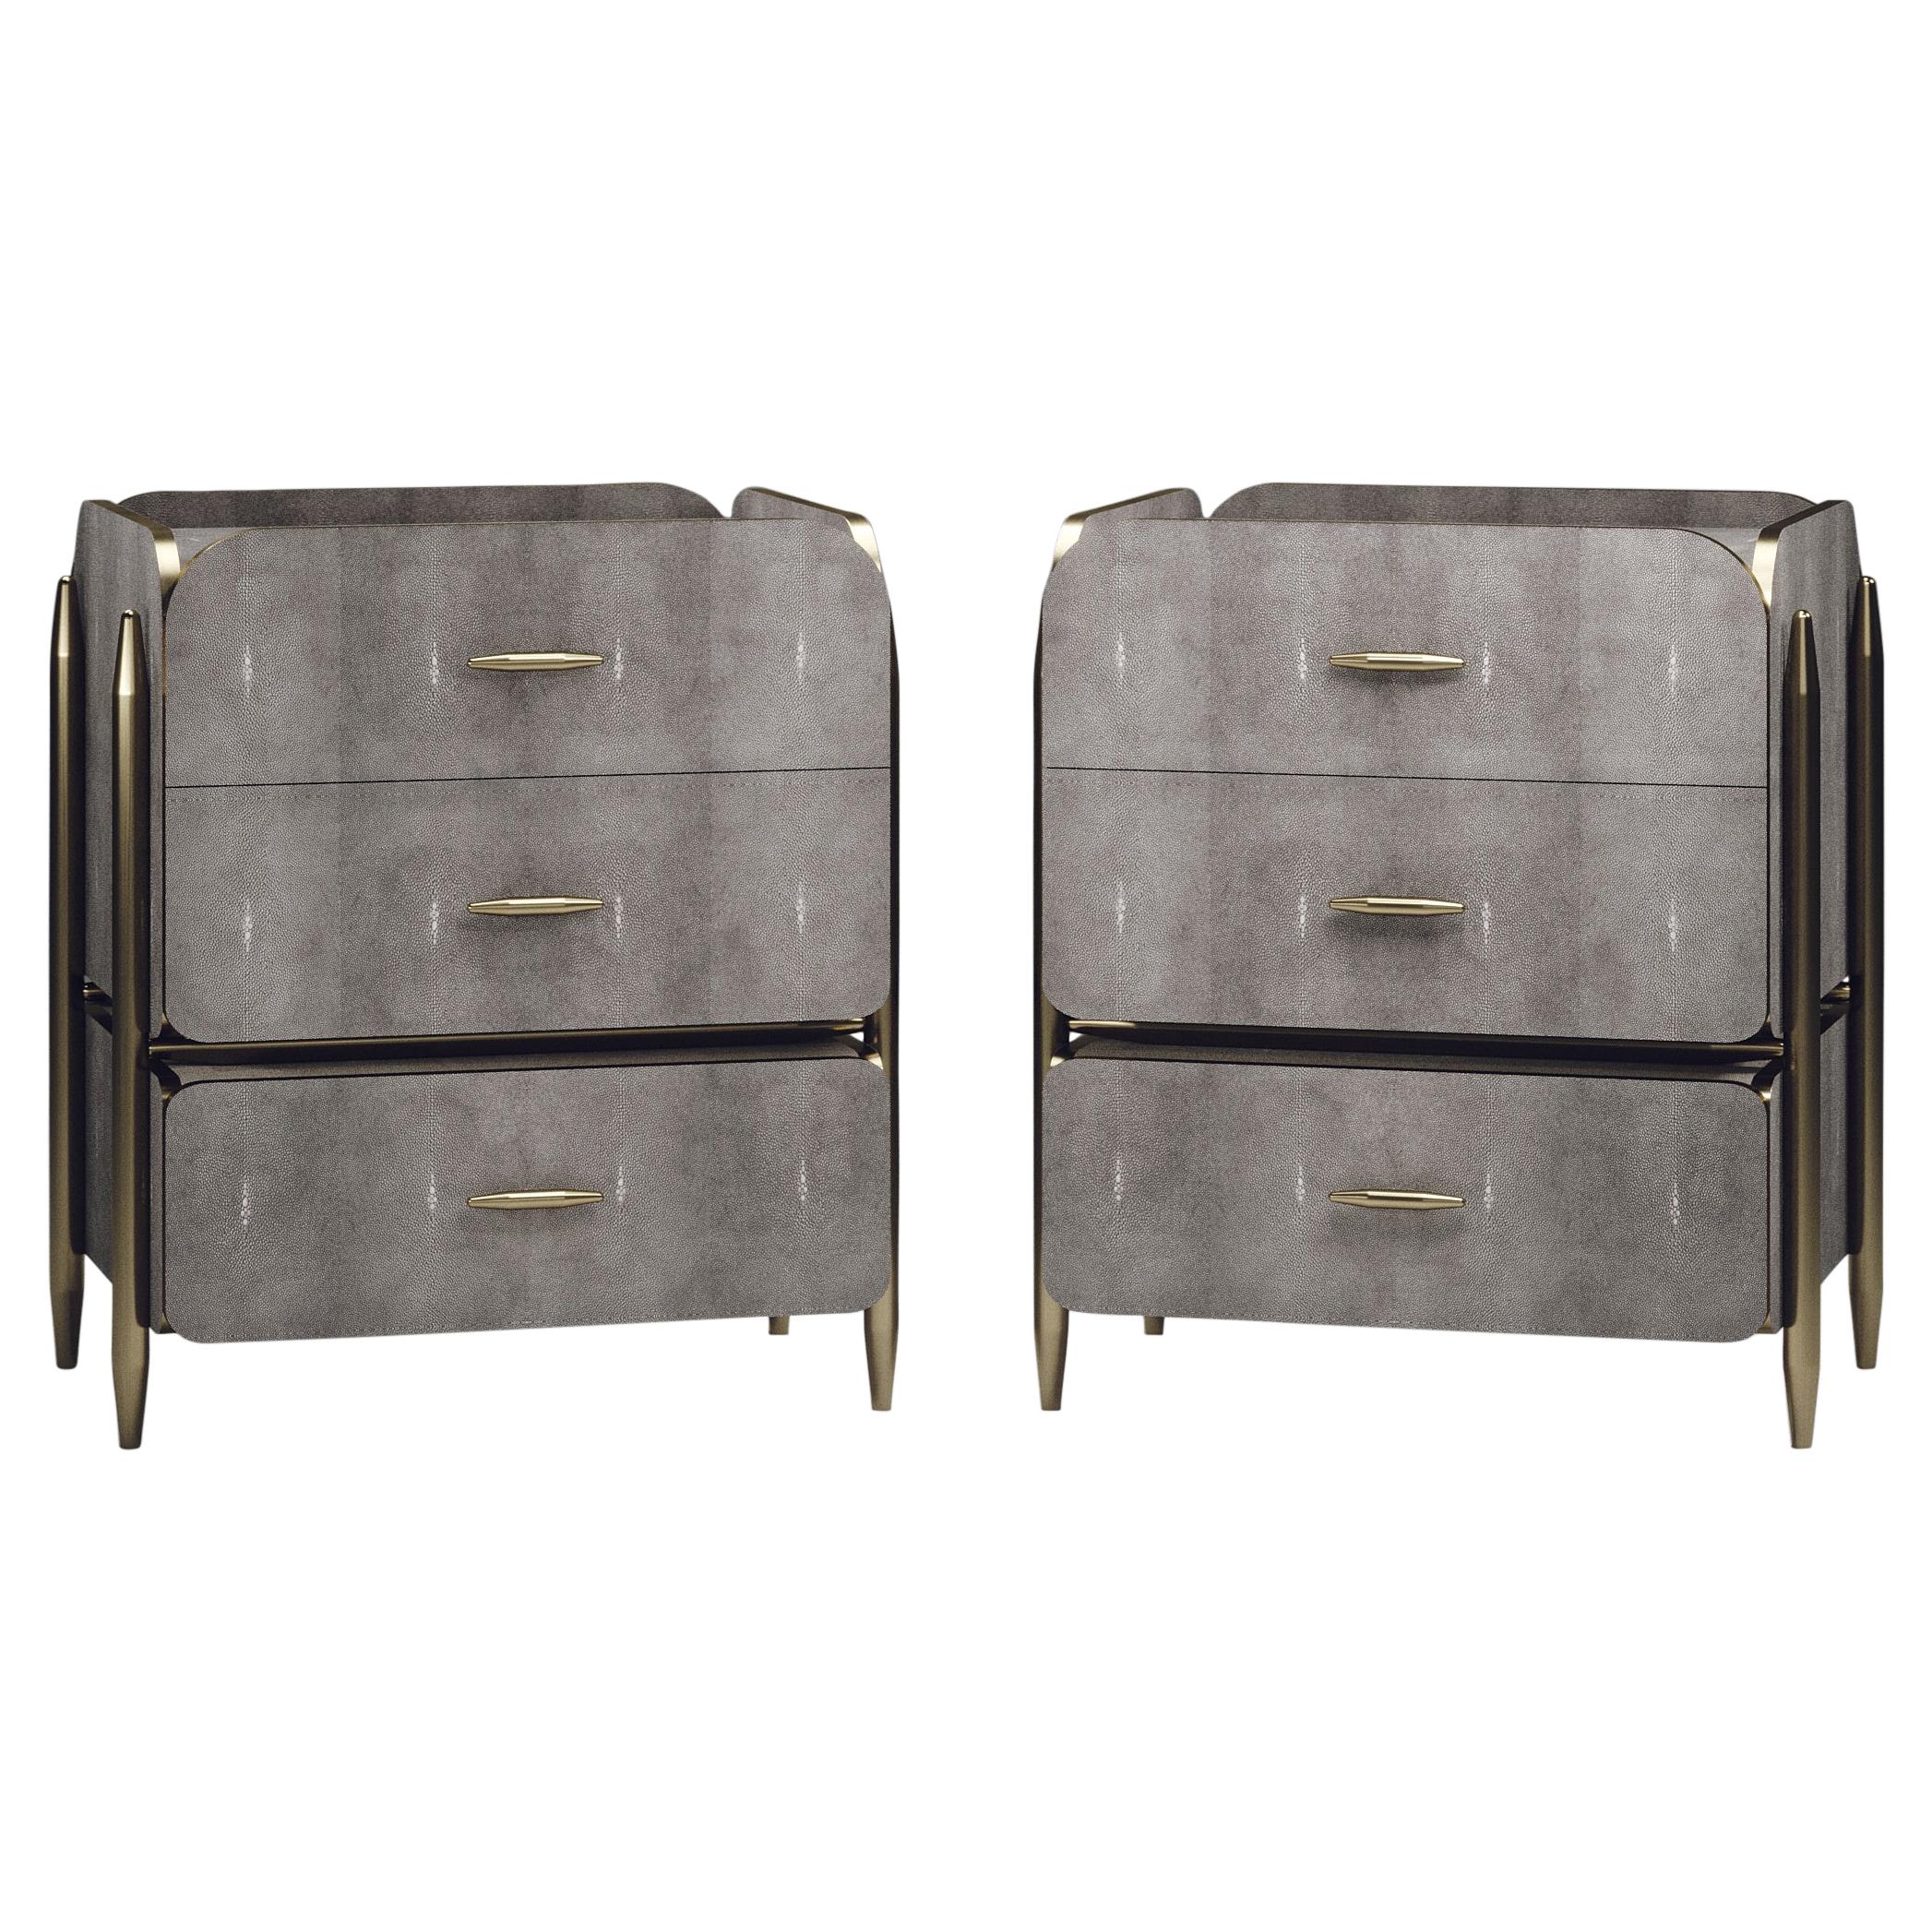 Pair of Shagreen Night Stands with Brass Accents by Kifu Paris For Sale